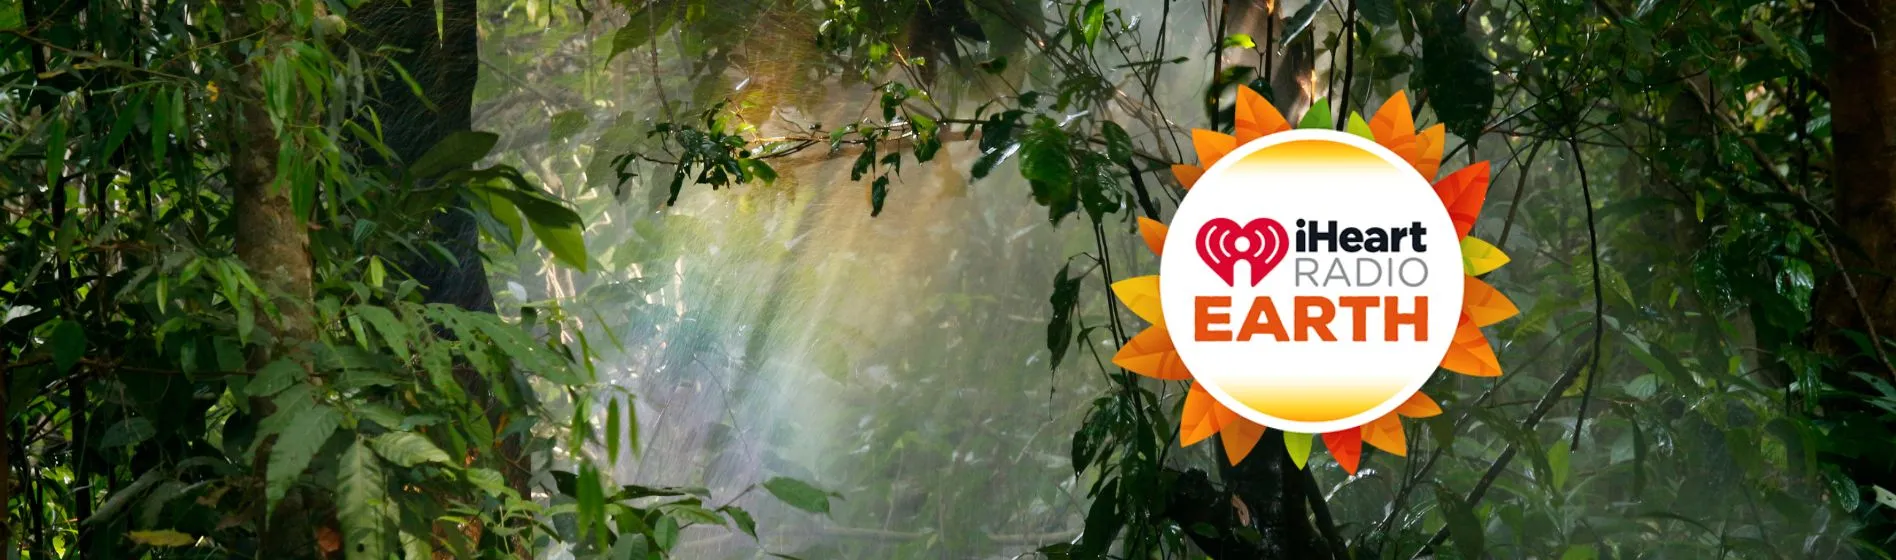 iHeart Radio Earth logo with photo of jungle in the background